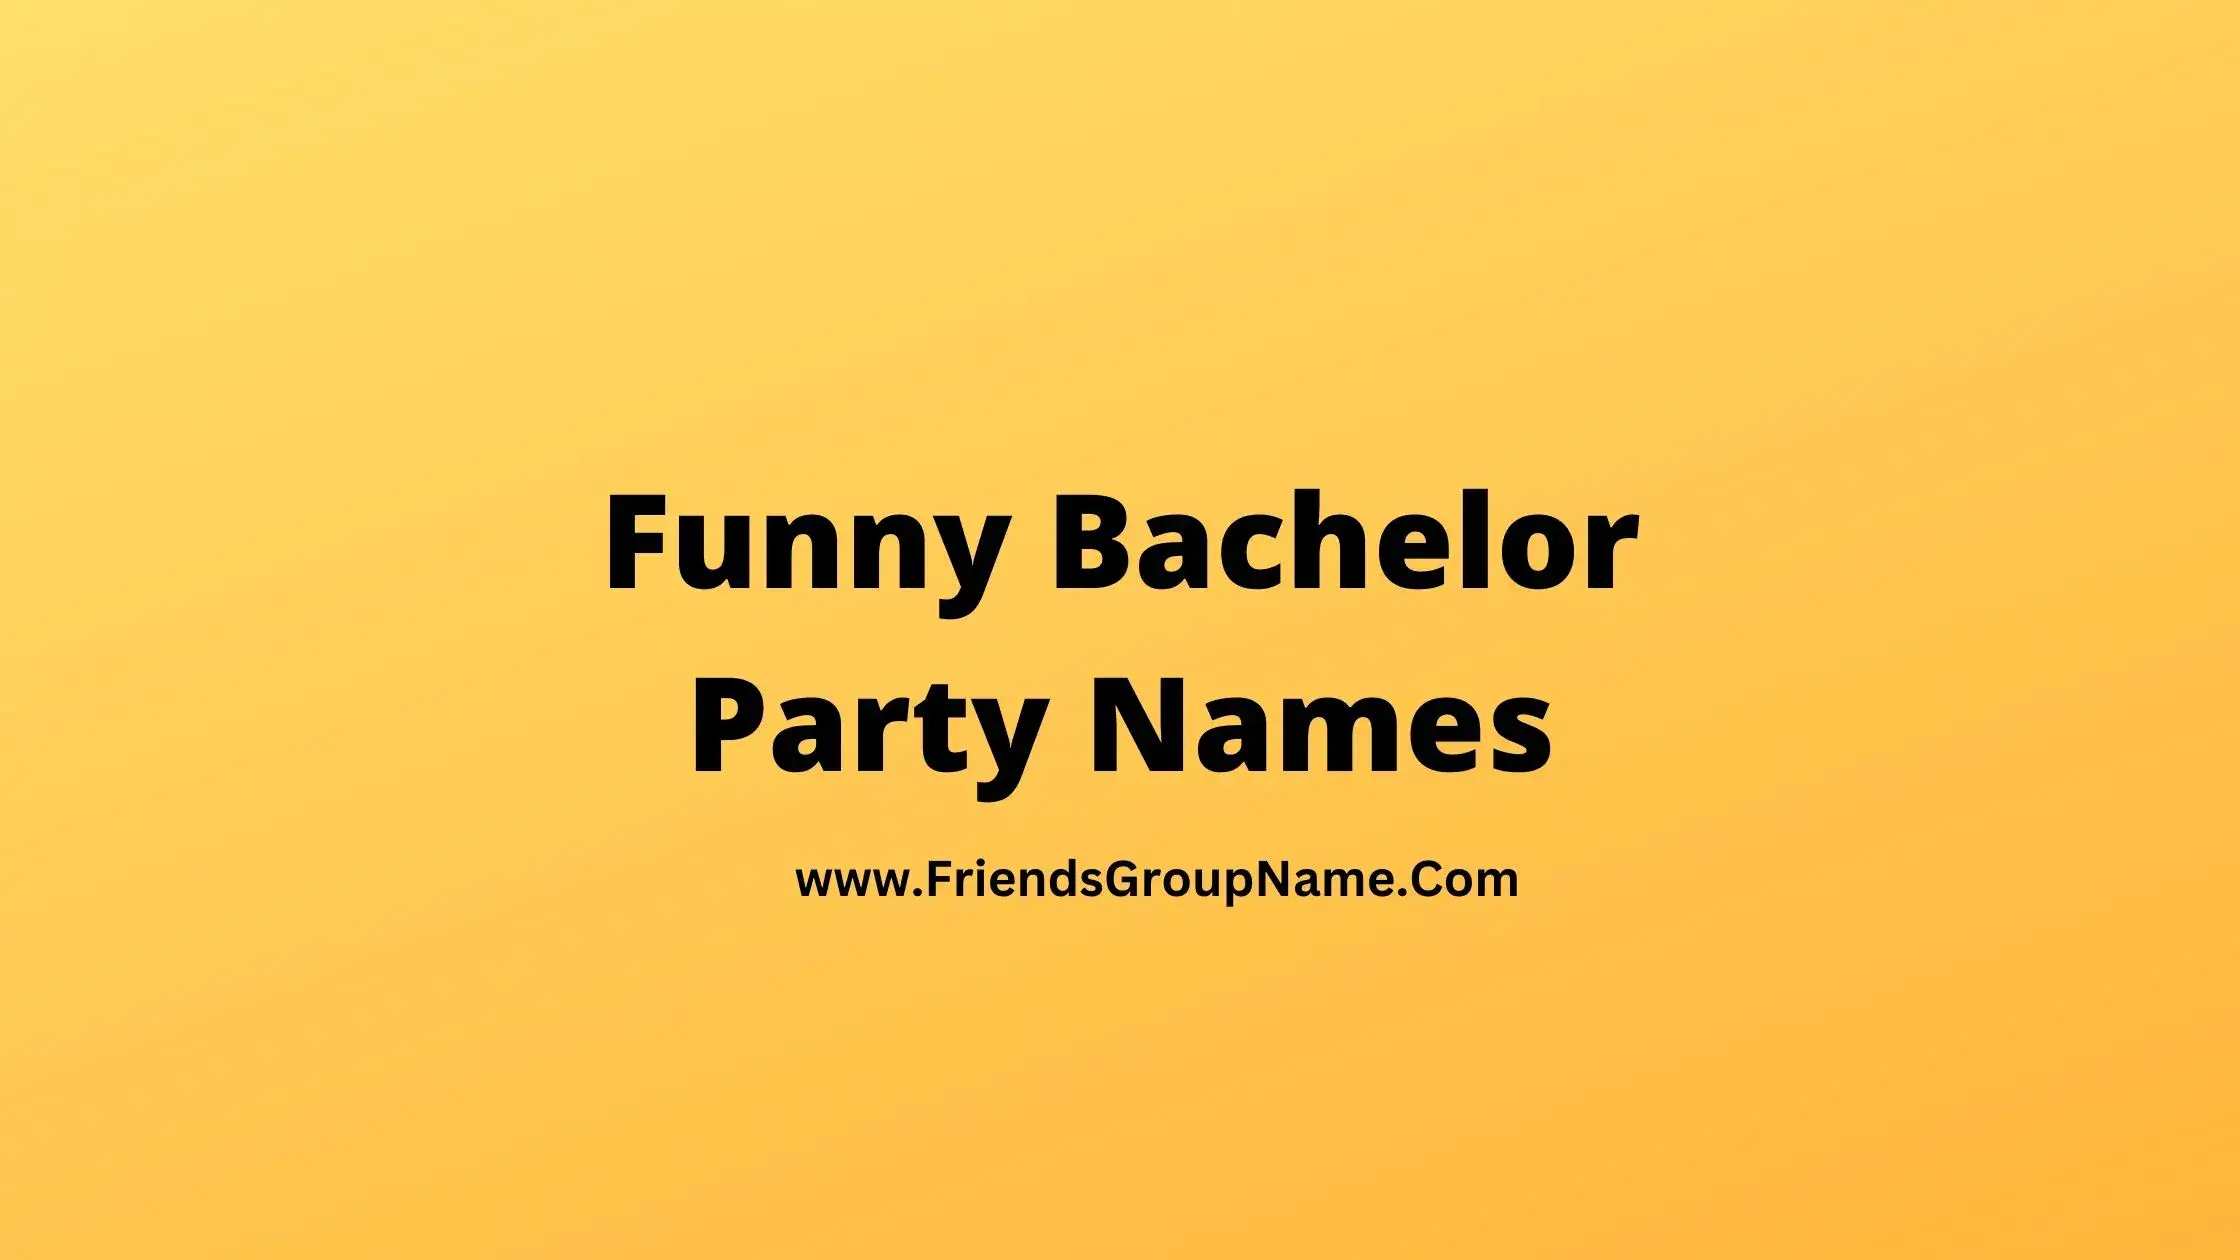 Funny Bachelor Party Names